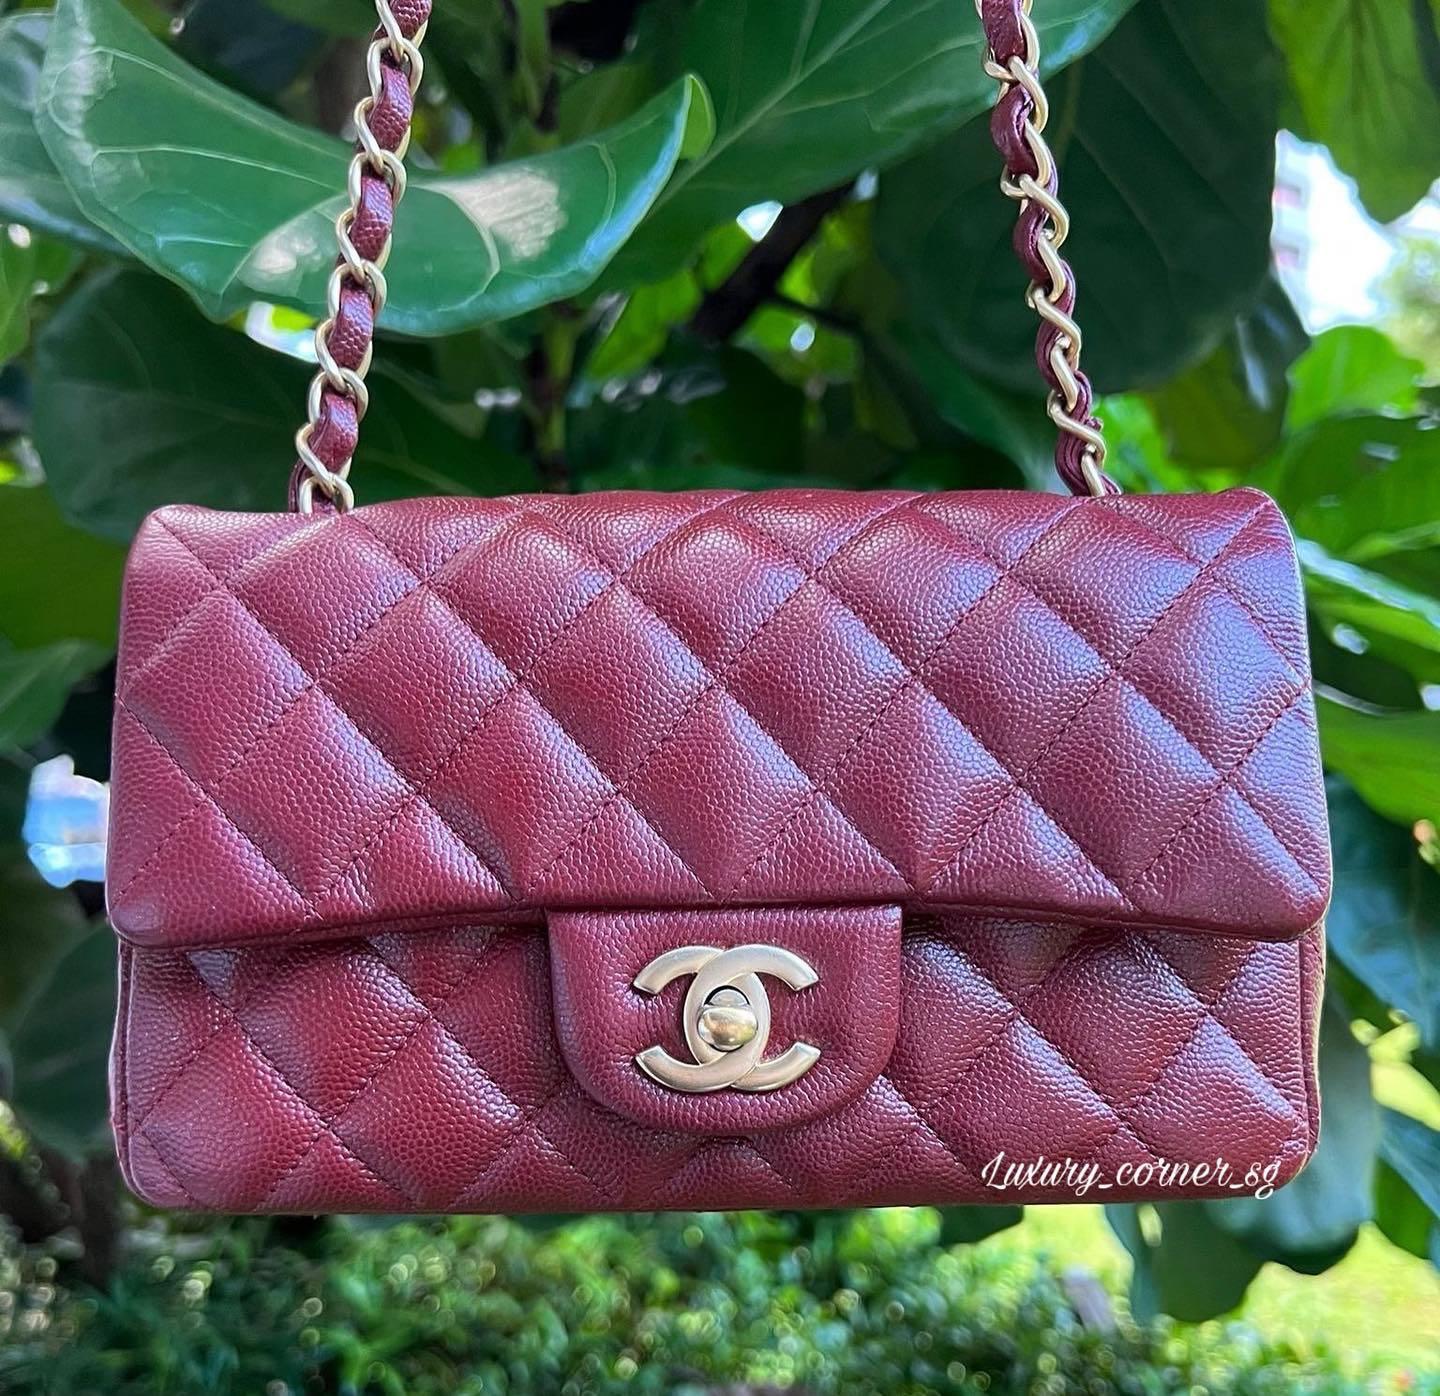 CHANEL 17s Iridescent Purple Mini Square *New - Timeless Luxuries